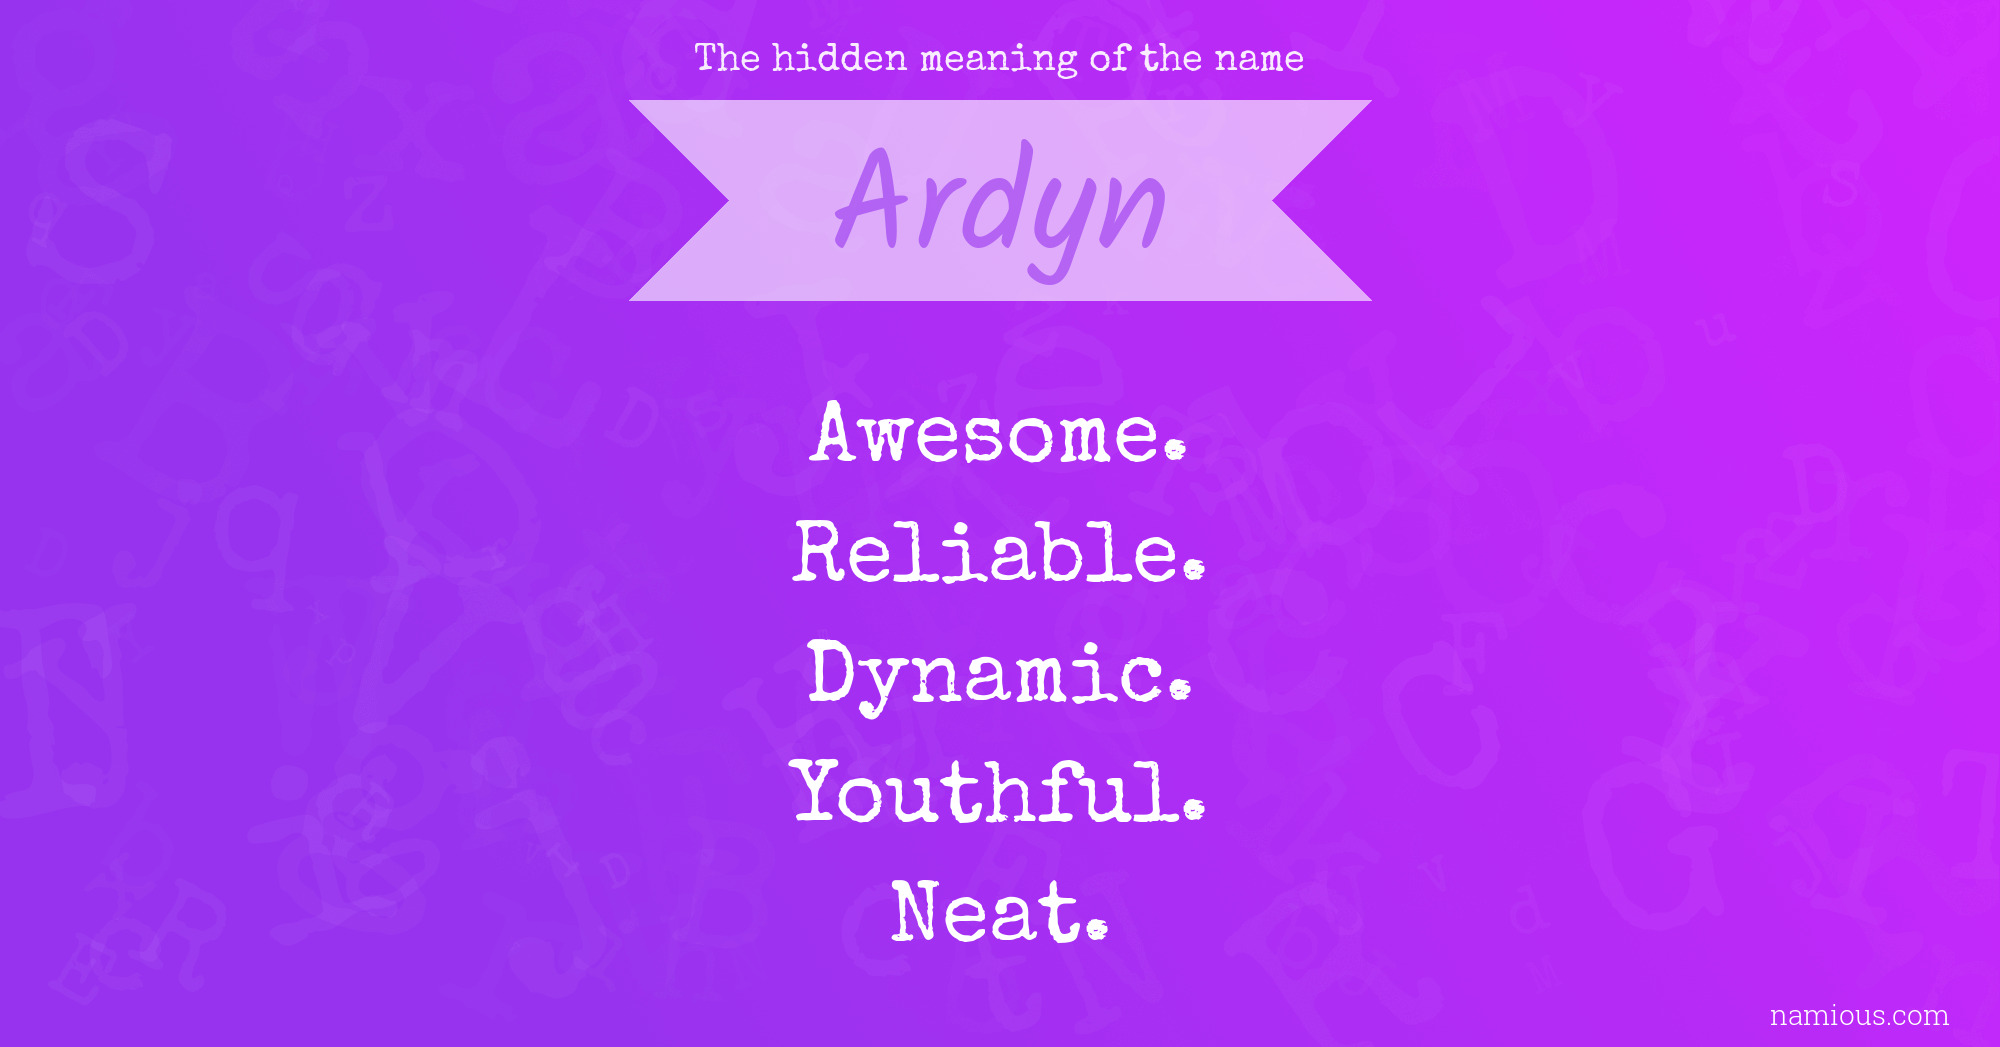 The hidden meaning of the name Ardyn